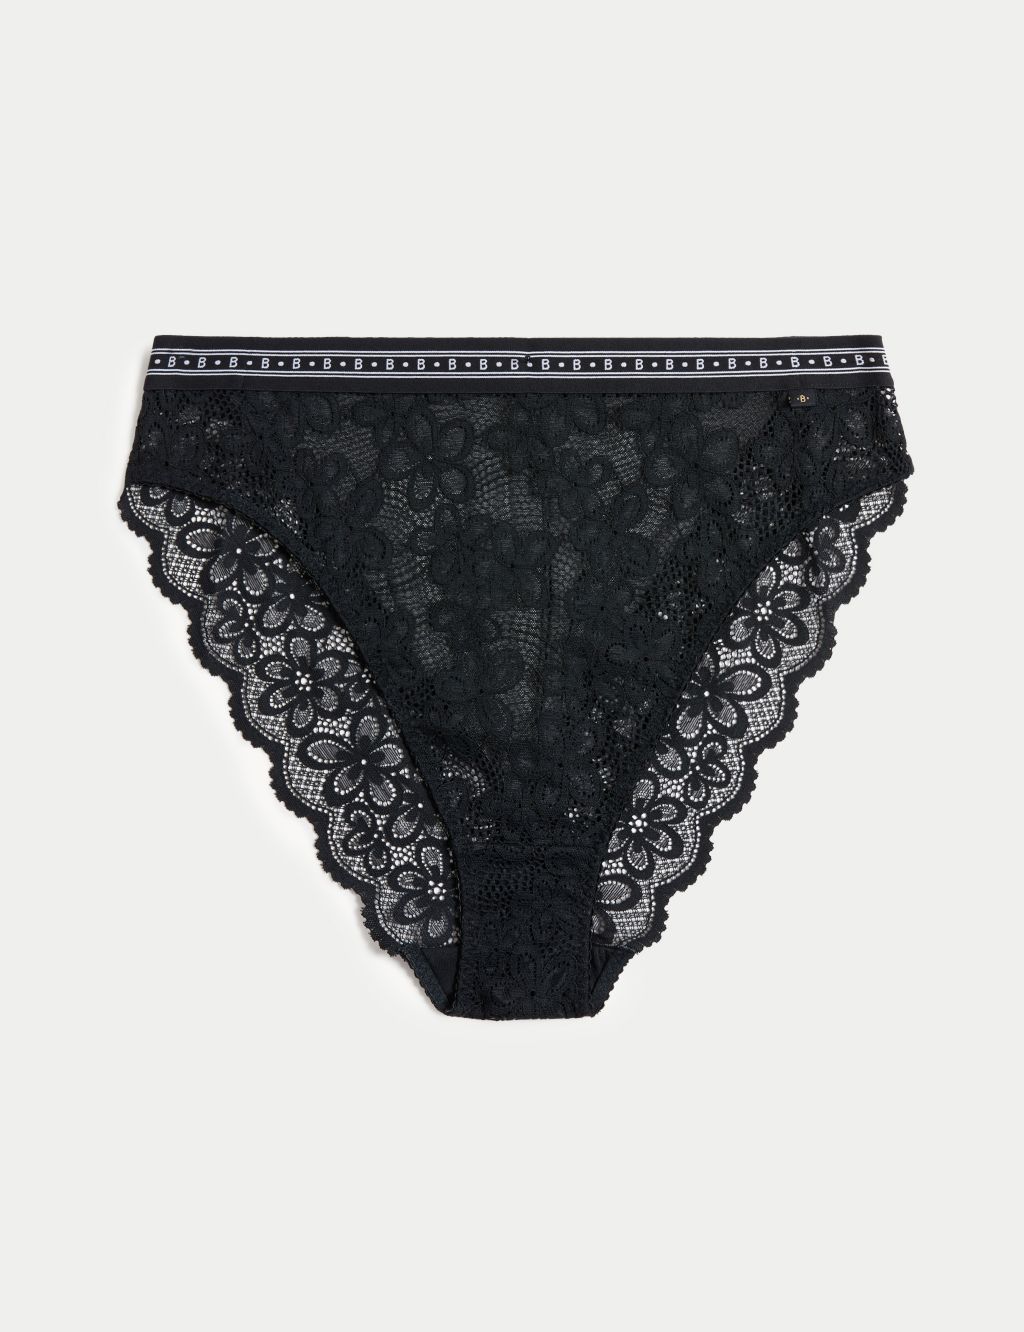 Cleo Lace High Waisted High Leg Knickers image 2